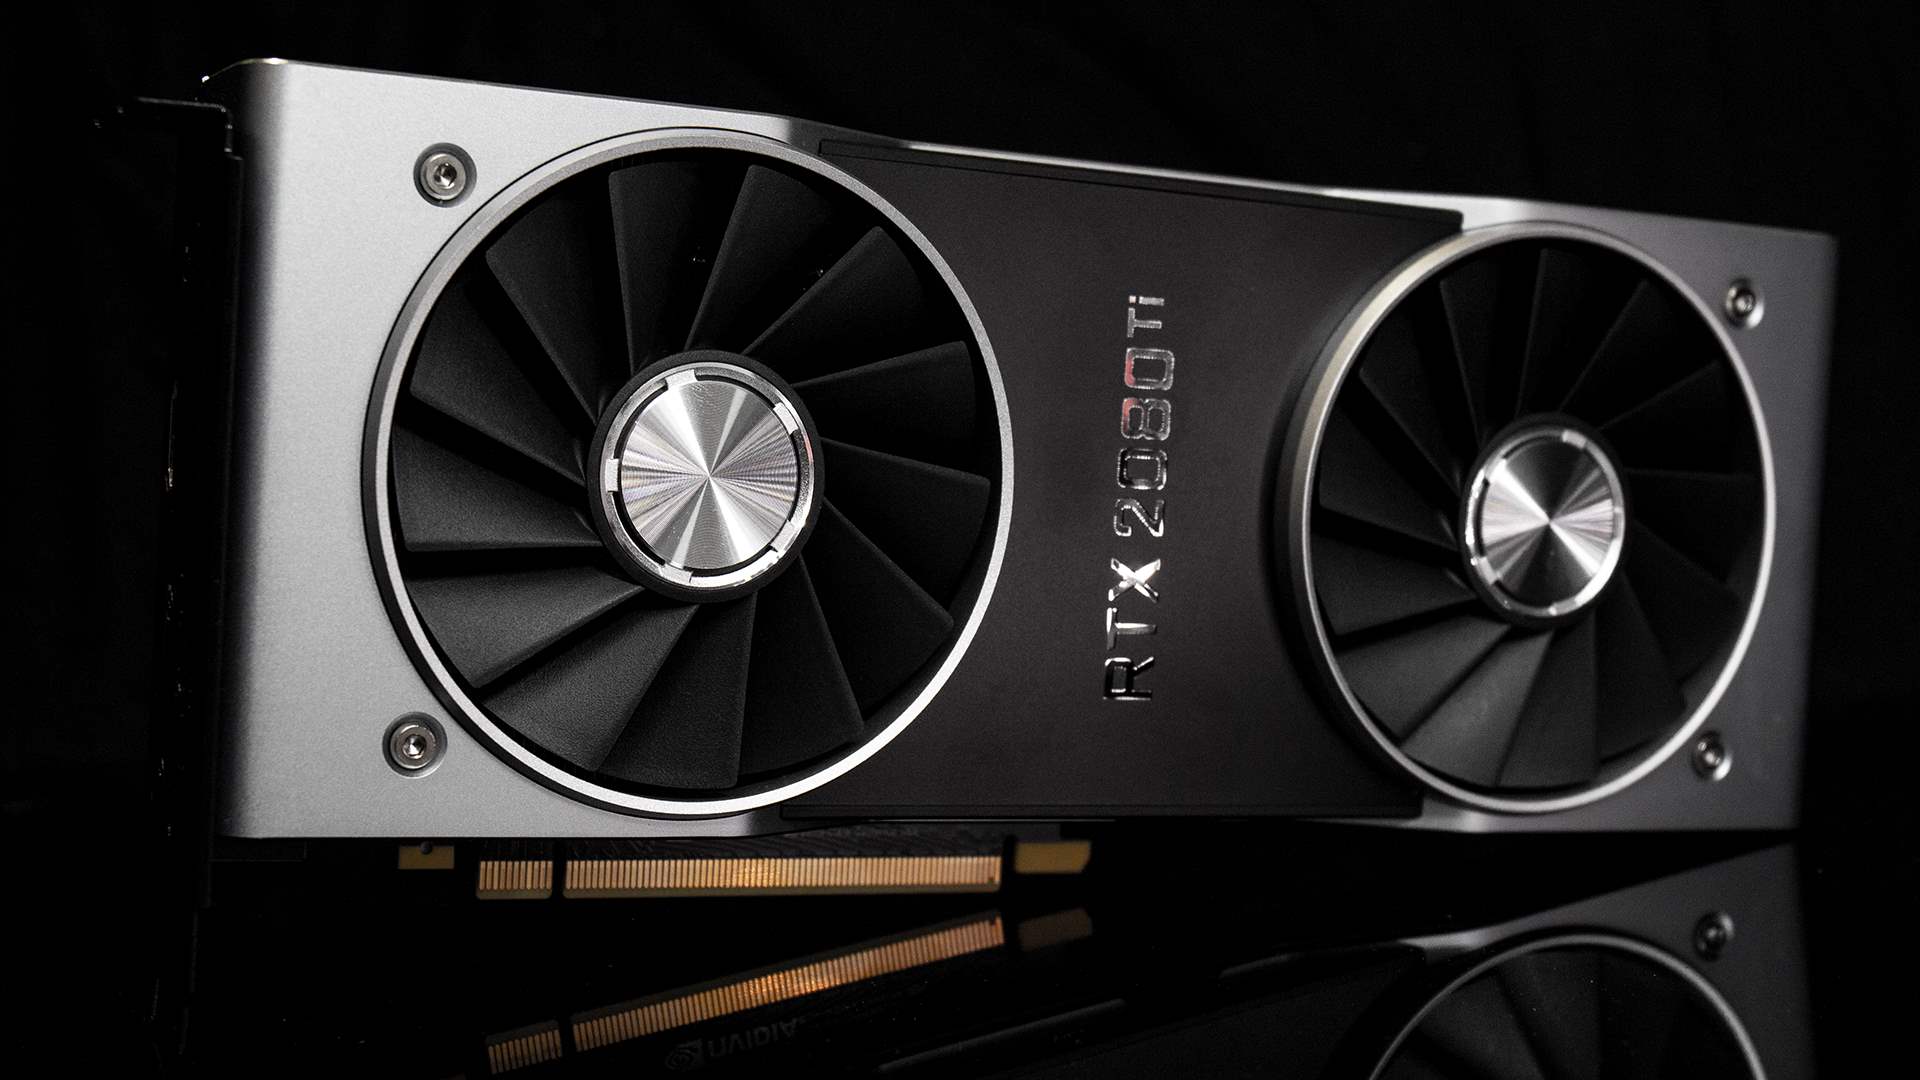 Nvidia GeForce RTX 2080 review: the gaming card around right now | PCGamesN